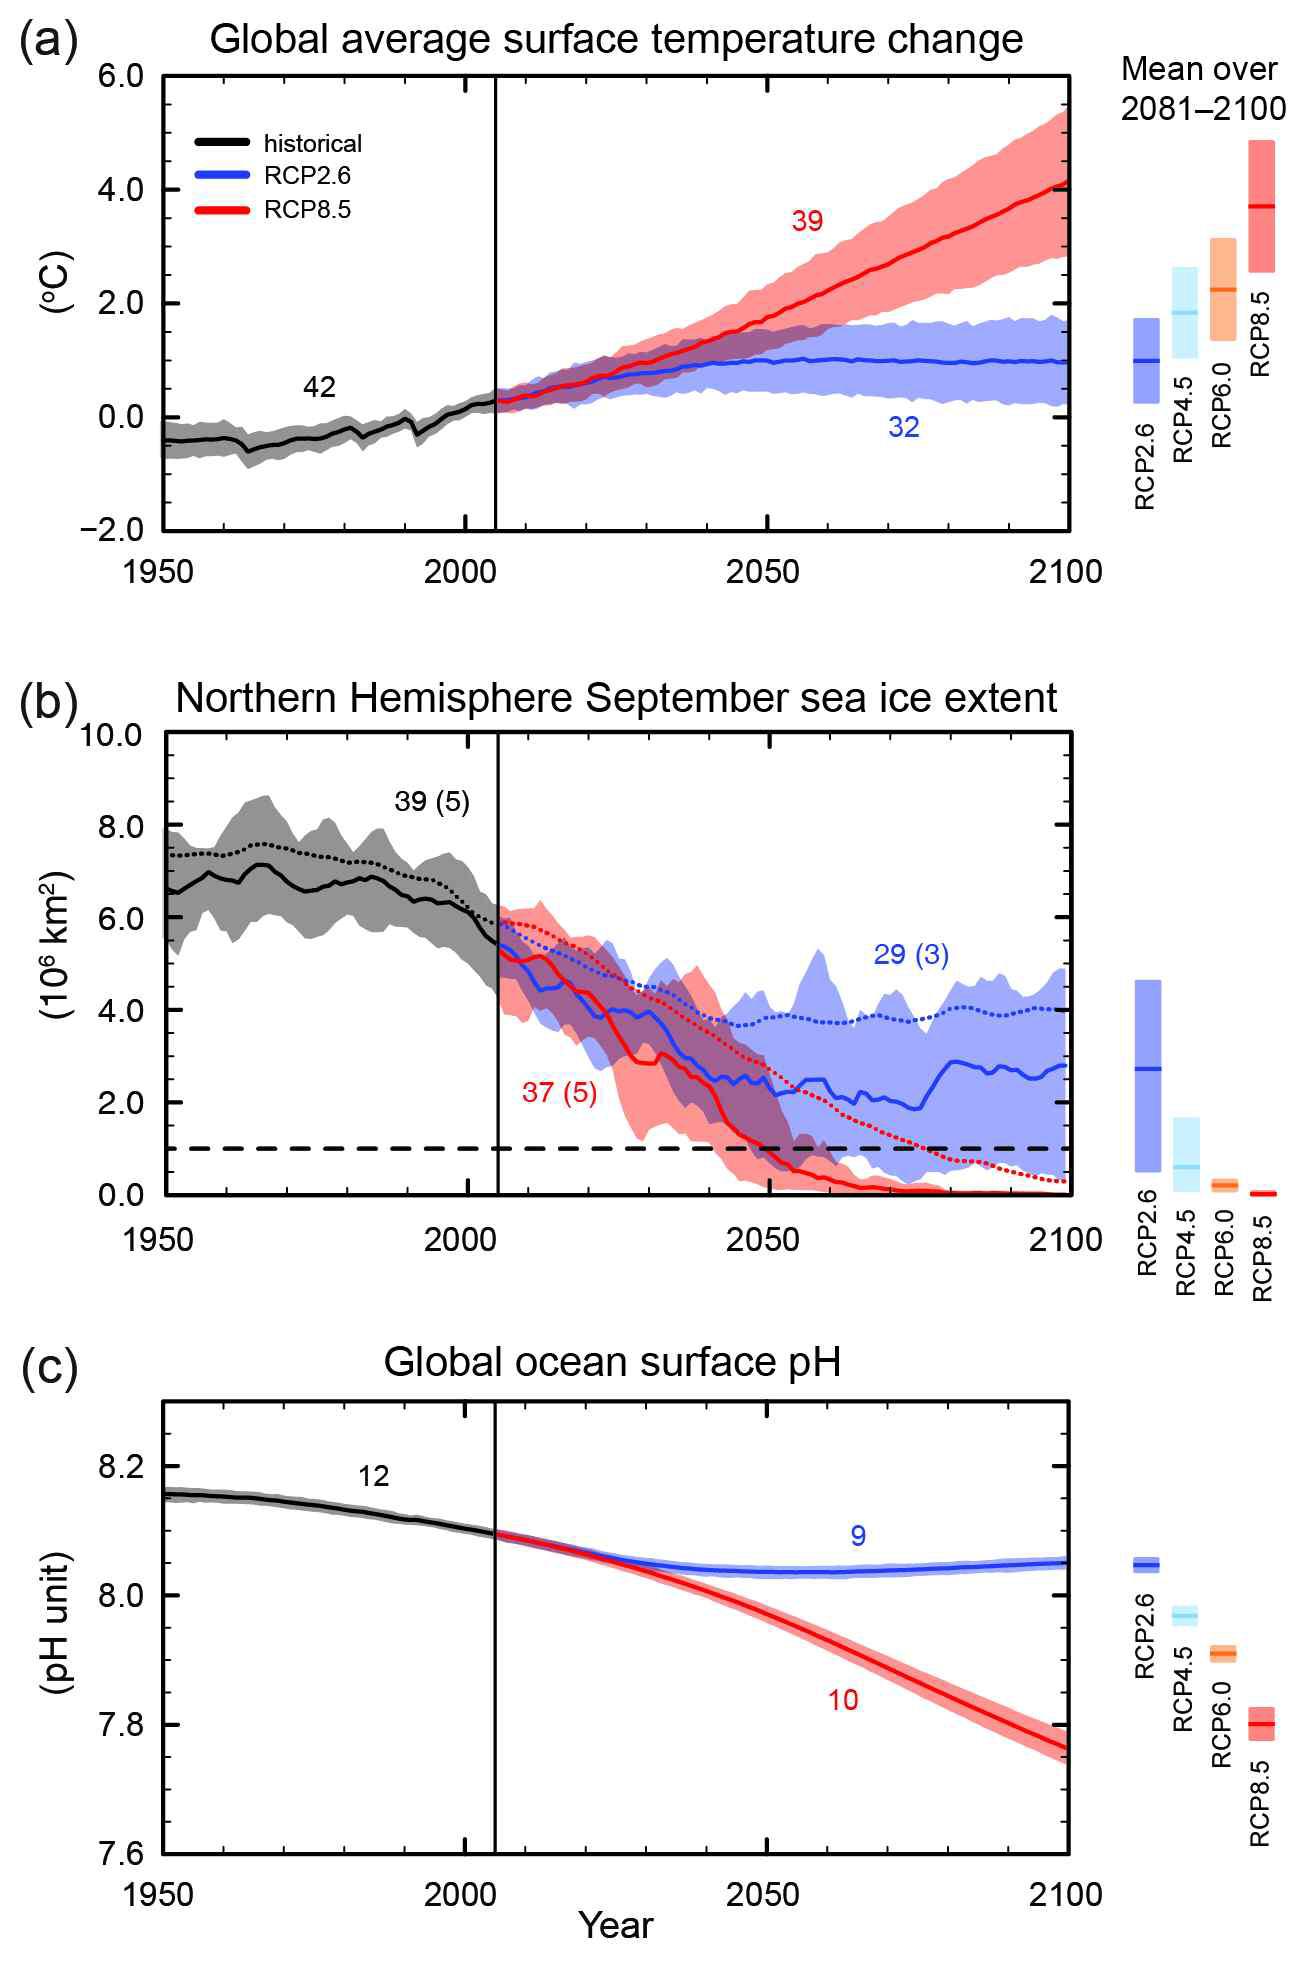 CMIP5 multi-model simulated time series from 1950 to 2100 for (a) change in global annual mean surface temperature relative to 1986–2005, (b) Northern Hemisphere September sea ice extent (5-year running mean), and (c) global mean ocean surface pH